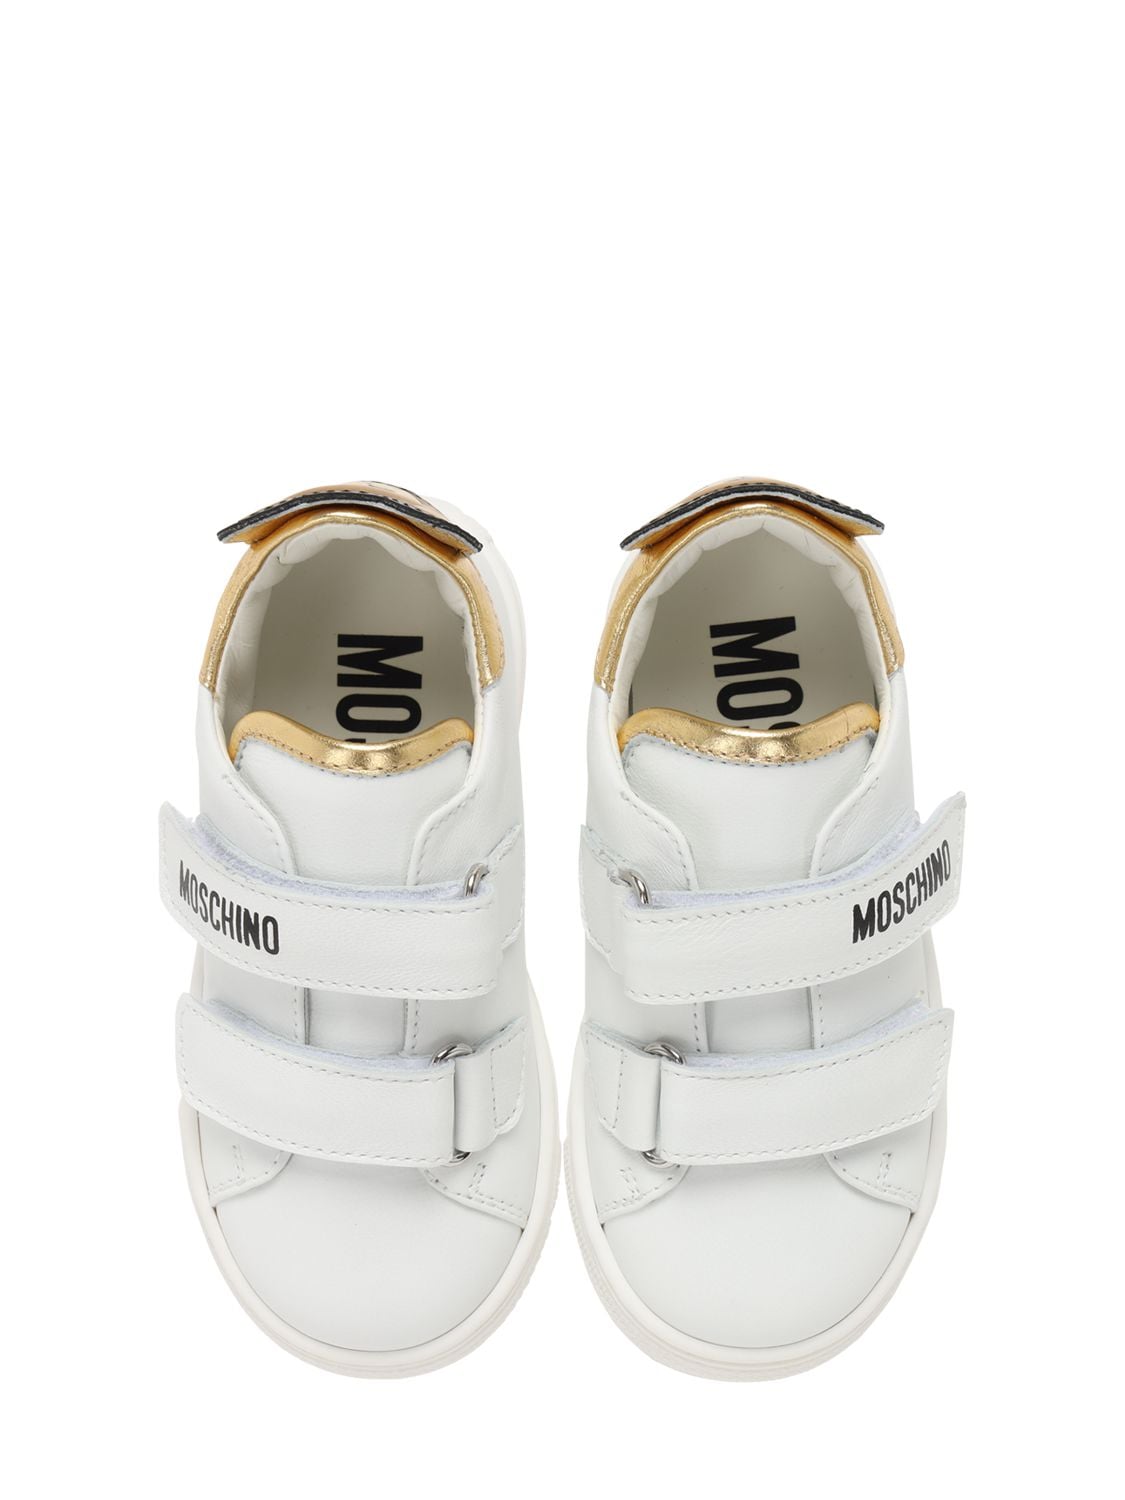 Moschino Kids' Teddy Bear Leather Strap Sneakers In White,gold | ModeSens